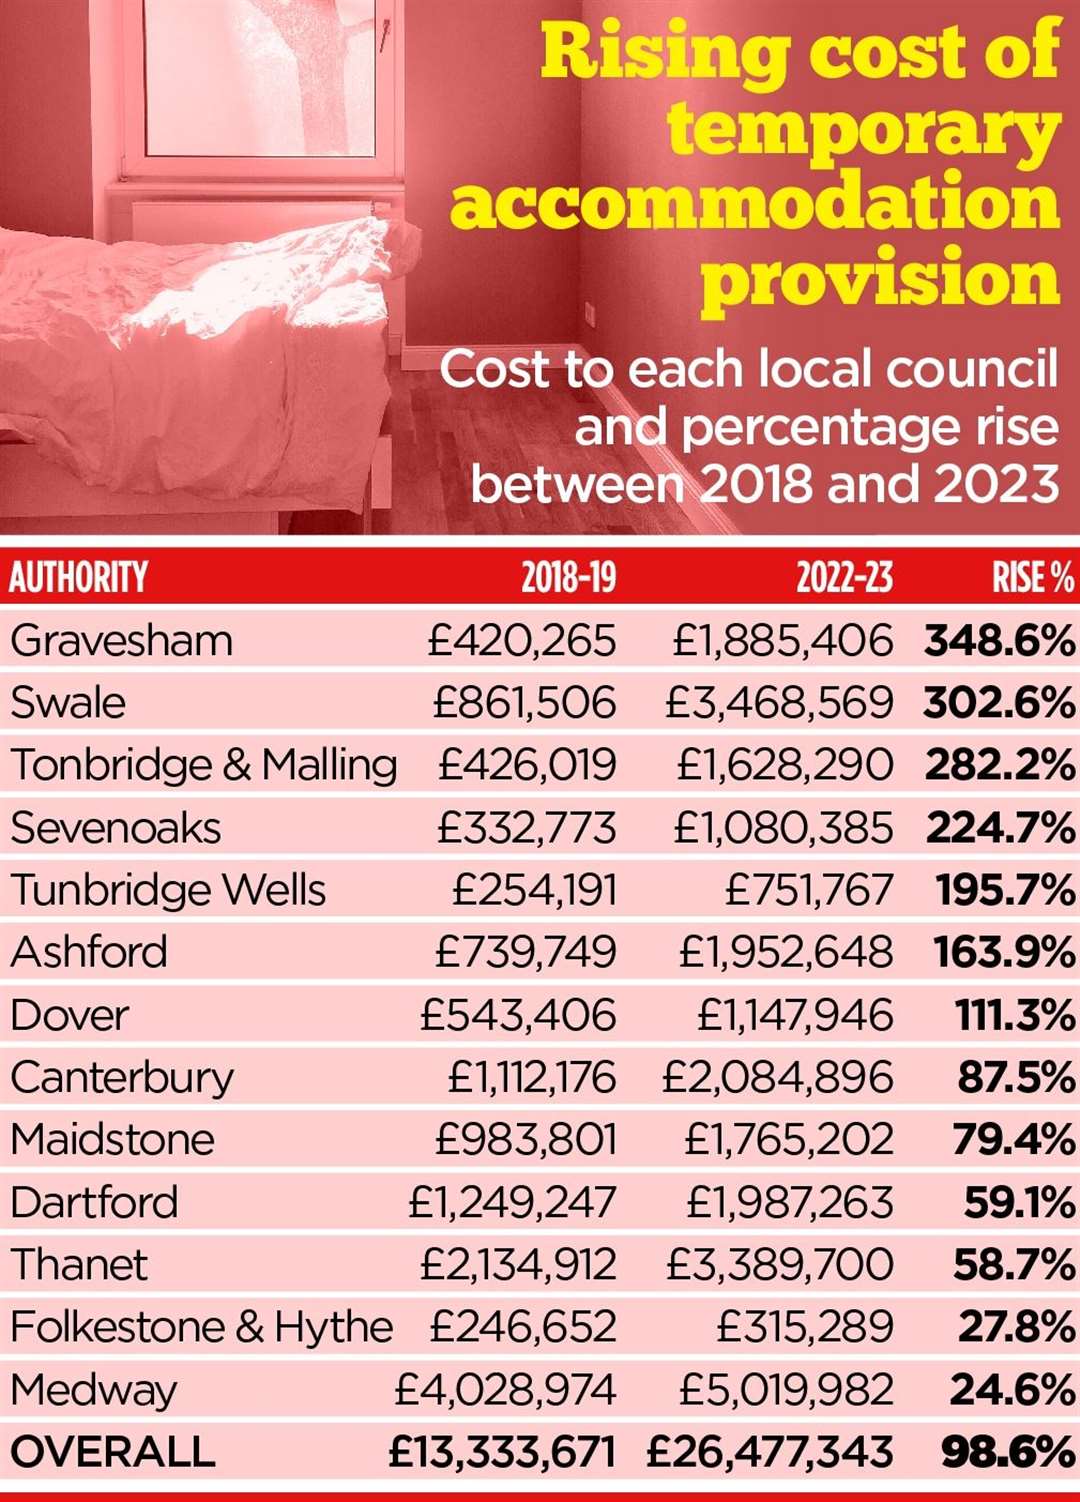 Each Kent council's spending on temporary accommodation in 2018-19 and 2022-23